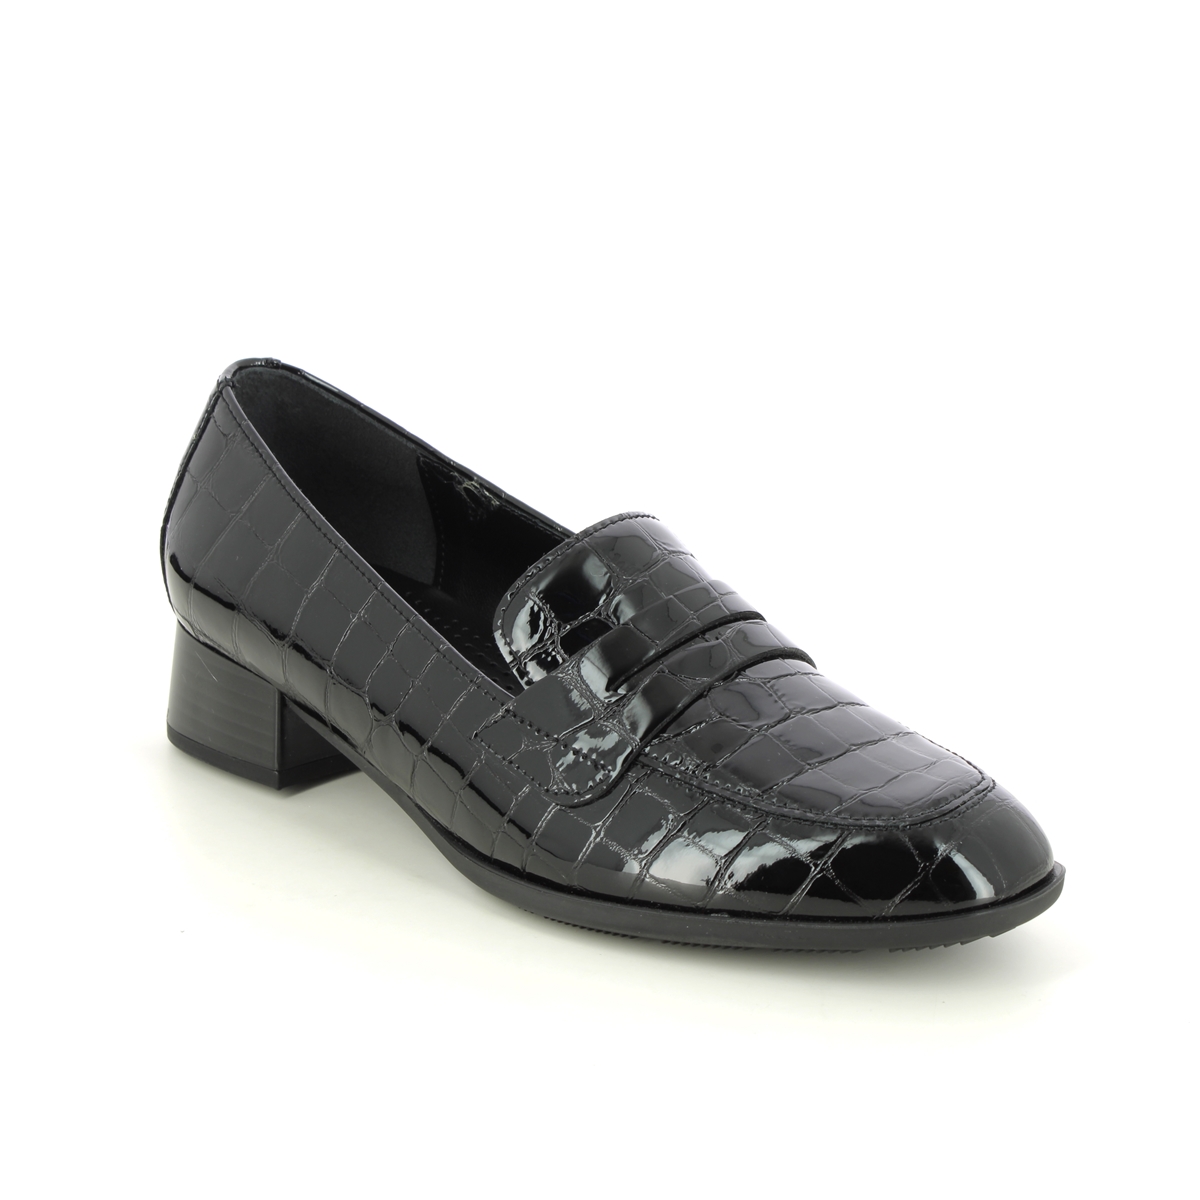 Gabor Right Penny Black Croc Womens Loafers 35.280.97 In Size 3.5 In Plain Black Croc Effect  Womens Loafers In Soft Black Croc Effect Leather